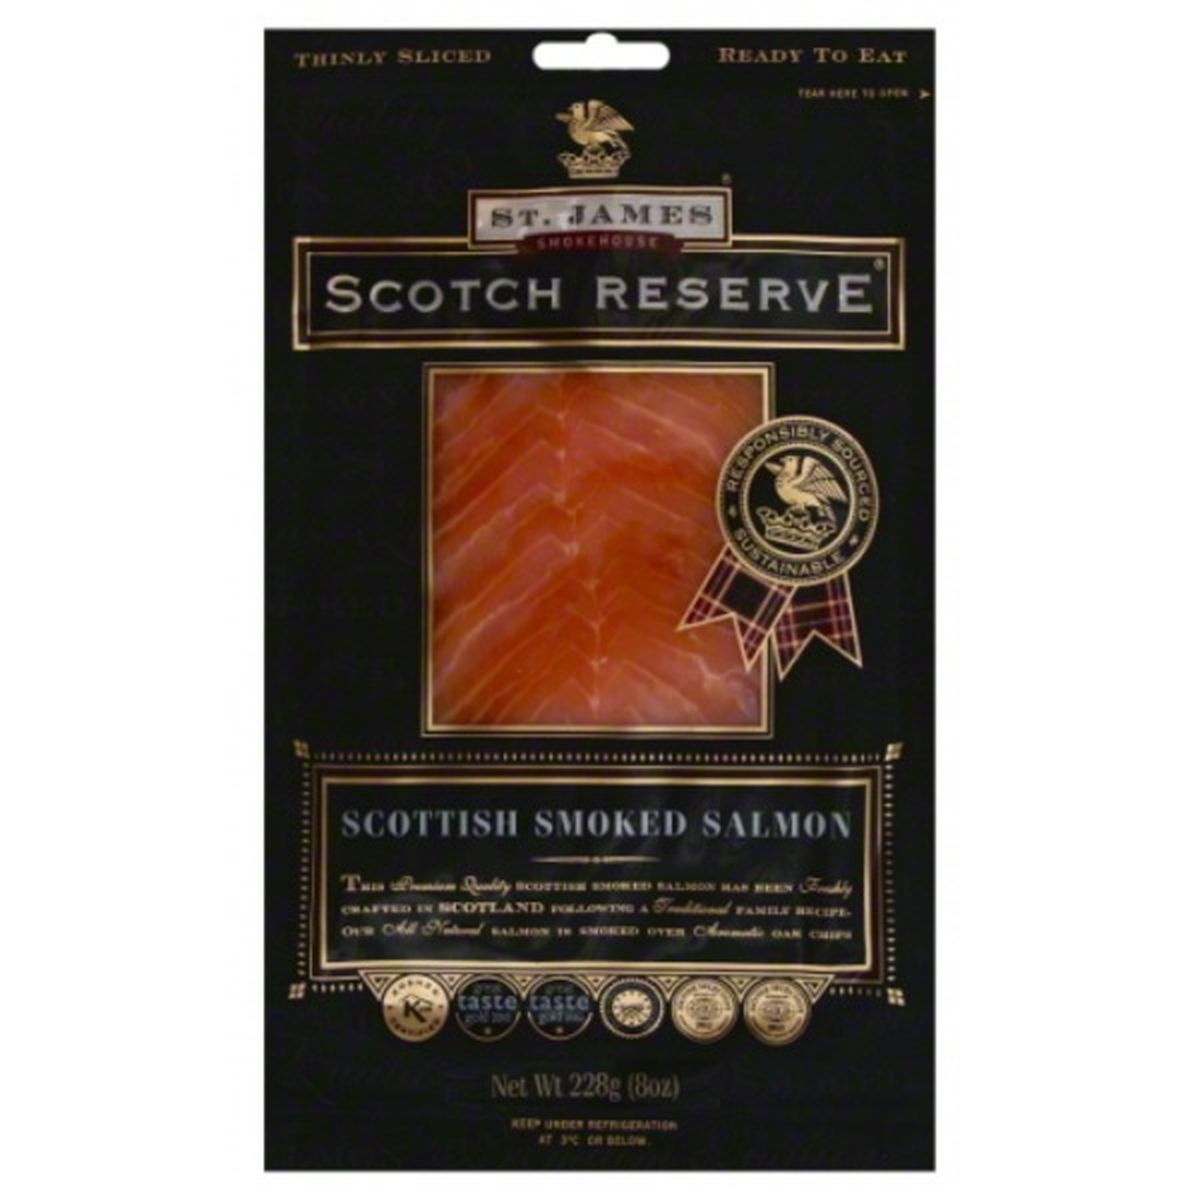 Calories in St James Scotch Reserve Salmon, Scottish Smoked, Thinly Sliced